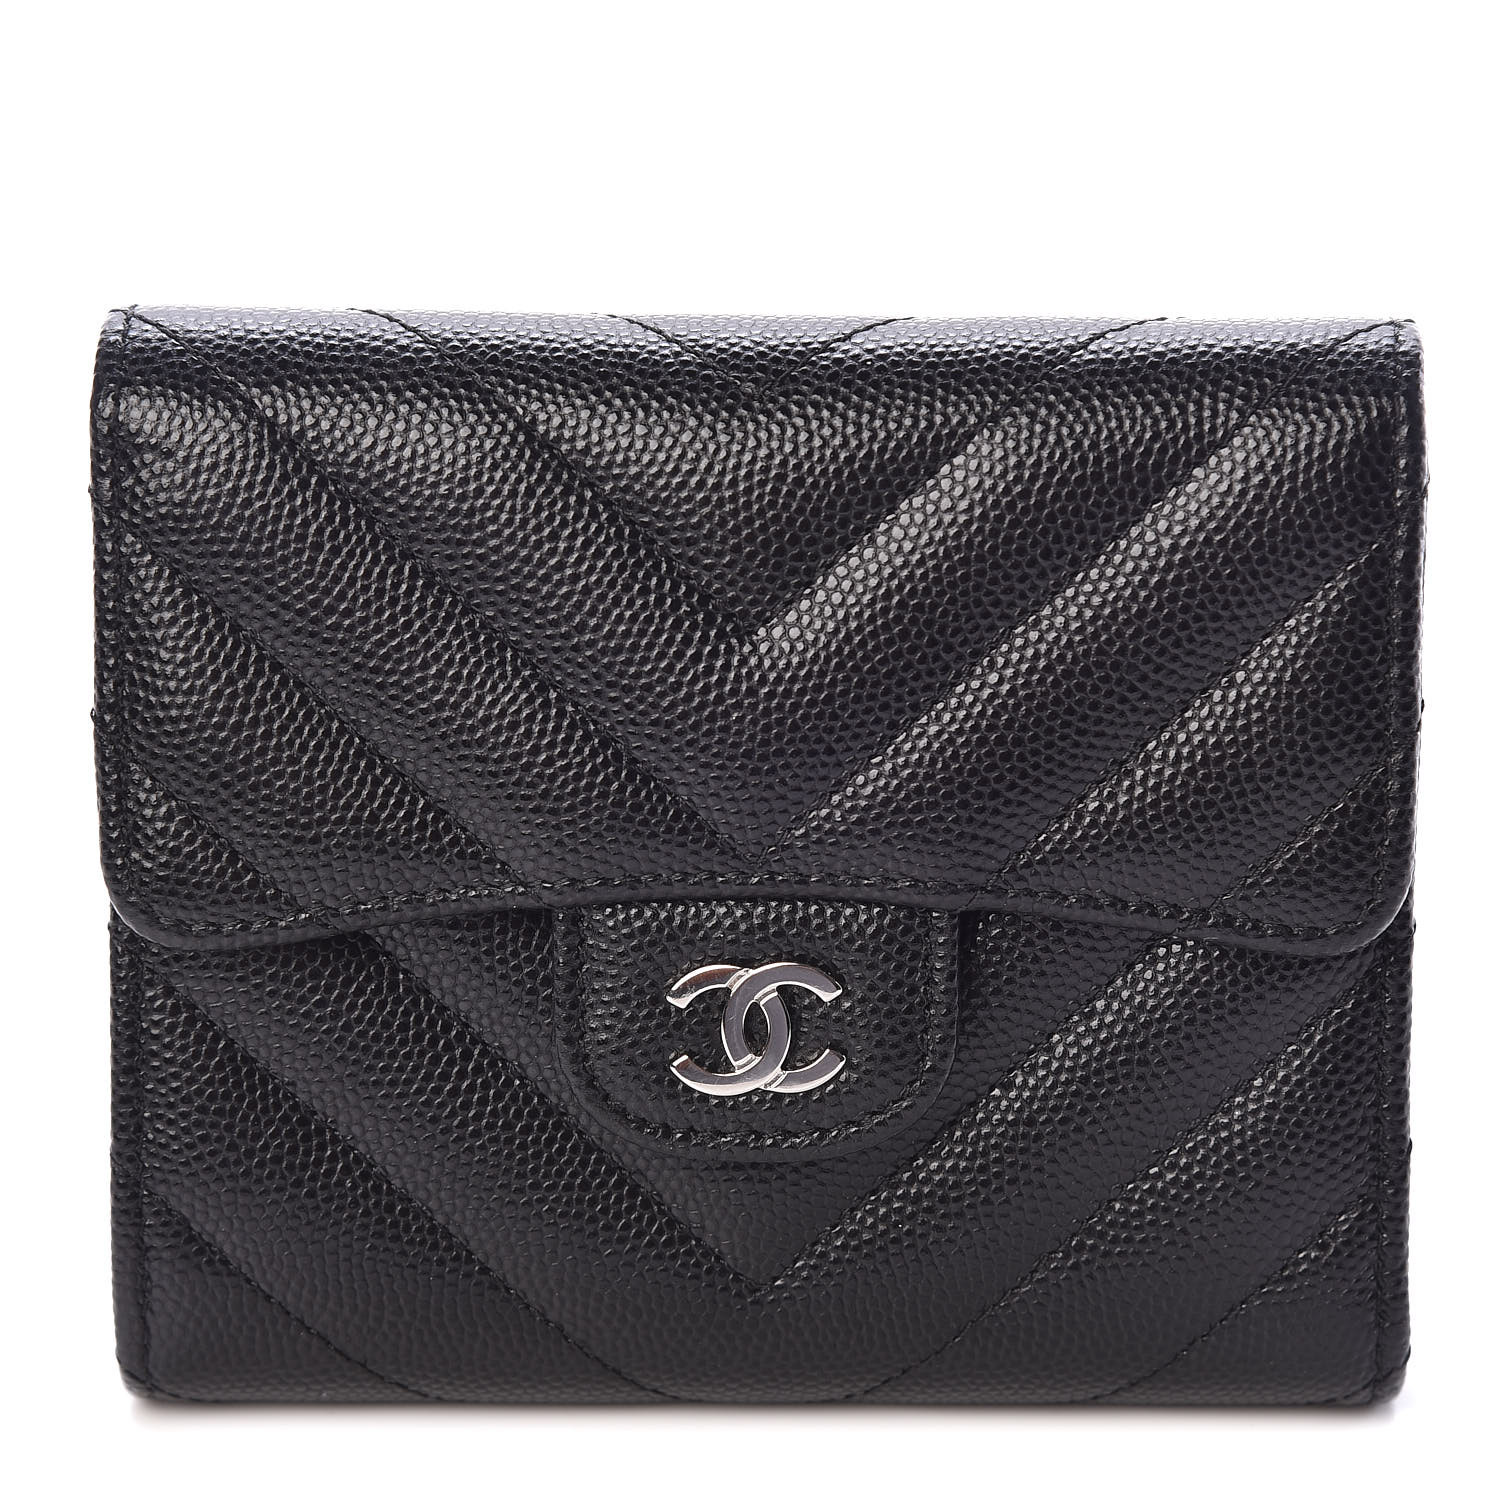 CHANEL Caviar Chevron Quilted Compact Flap Wallet Black 457031